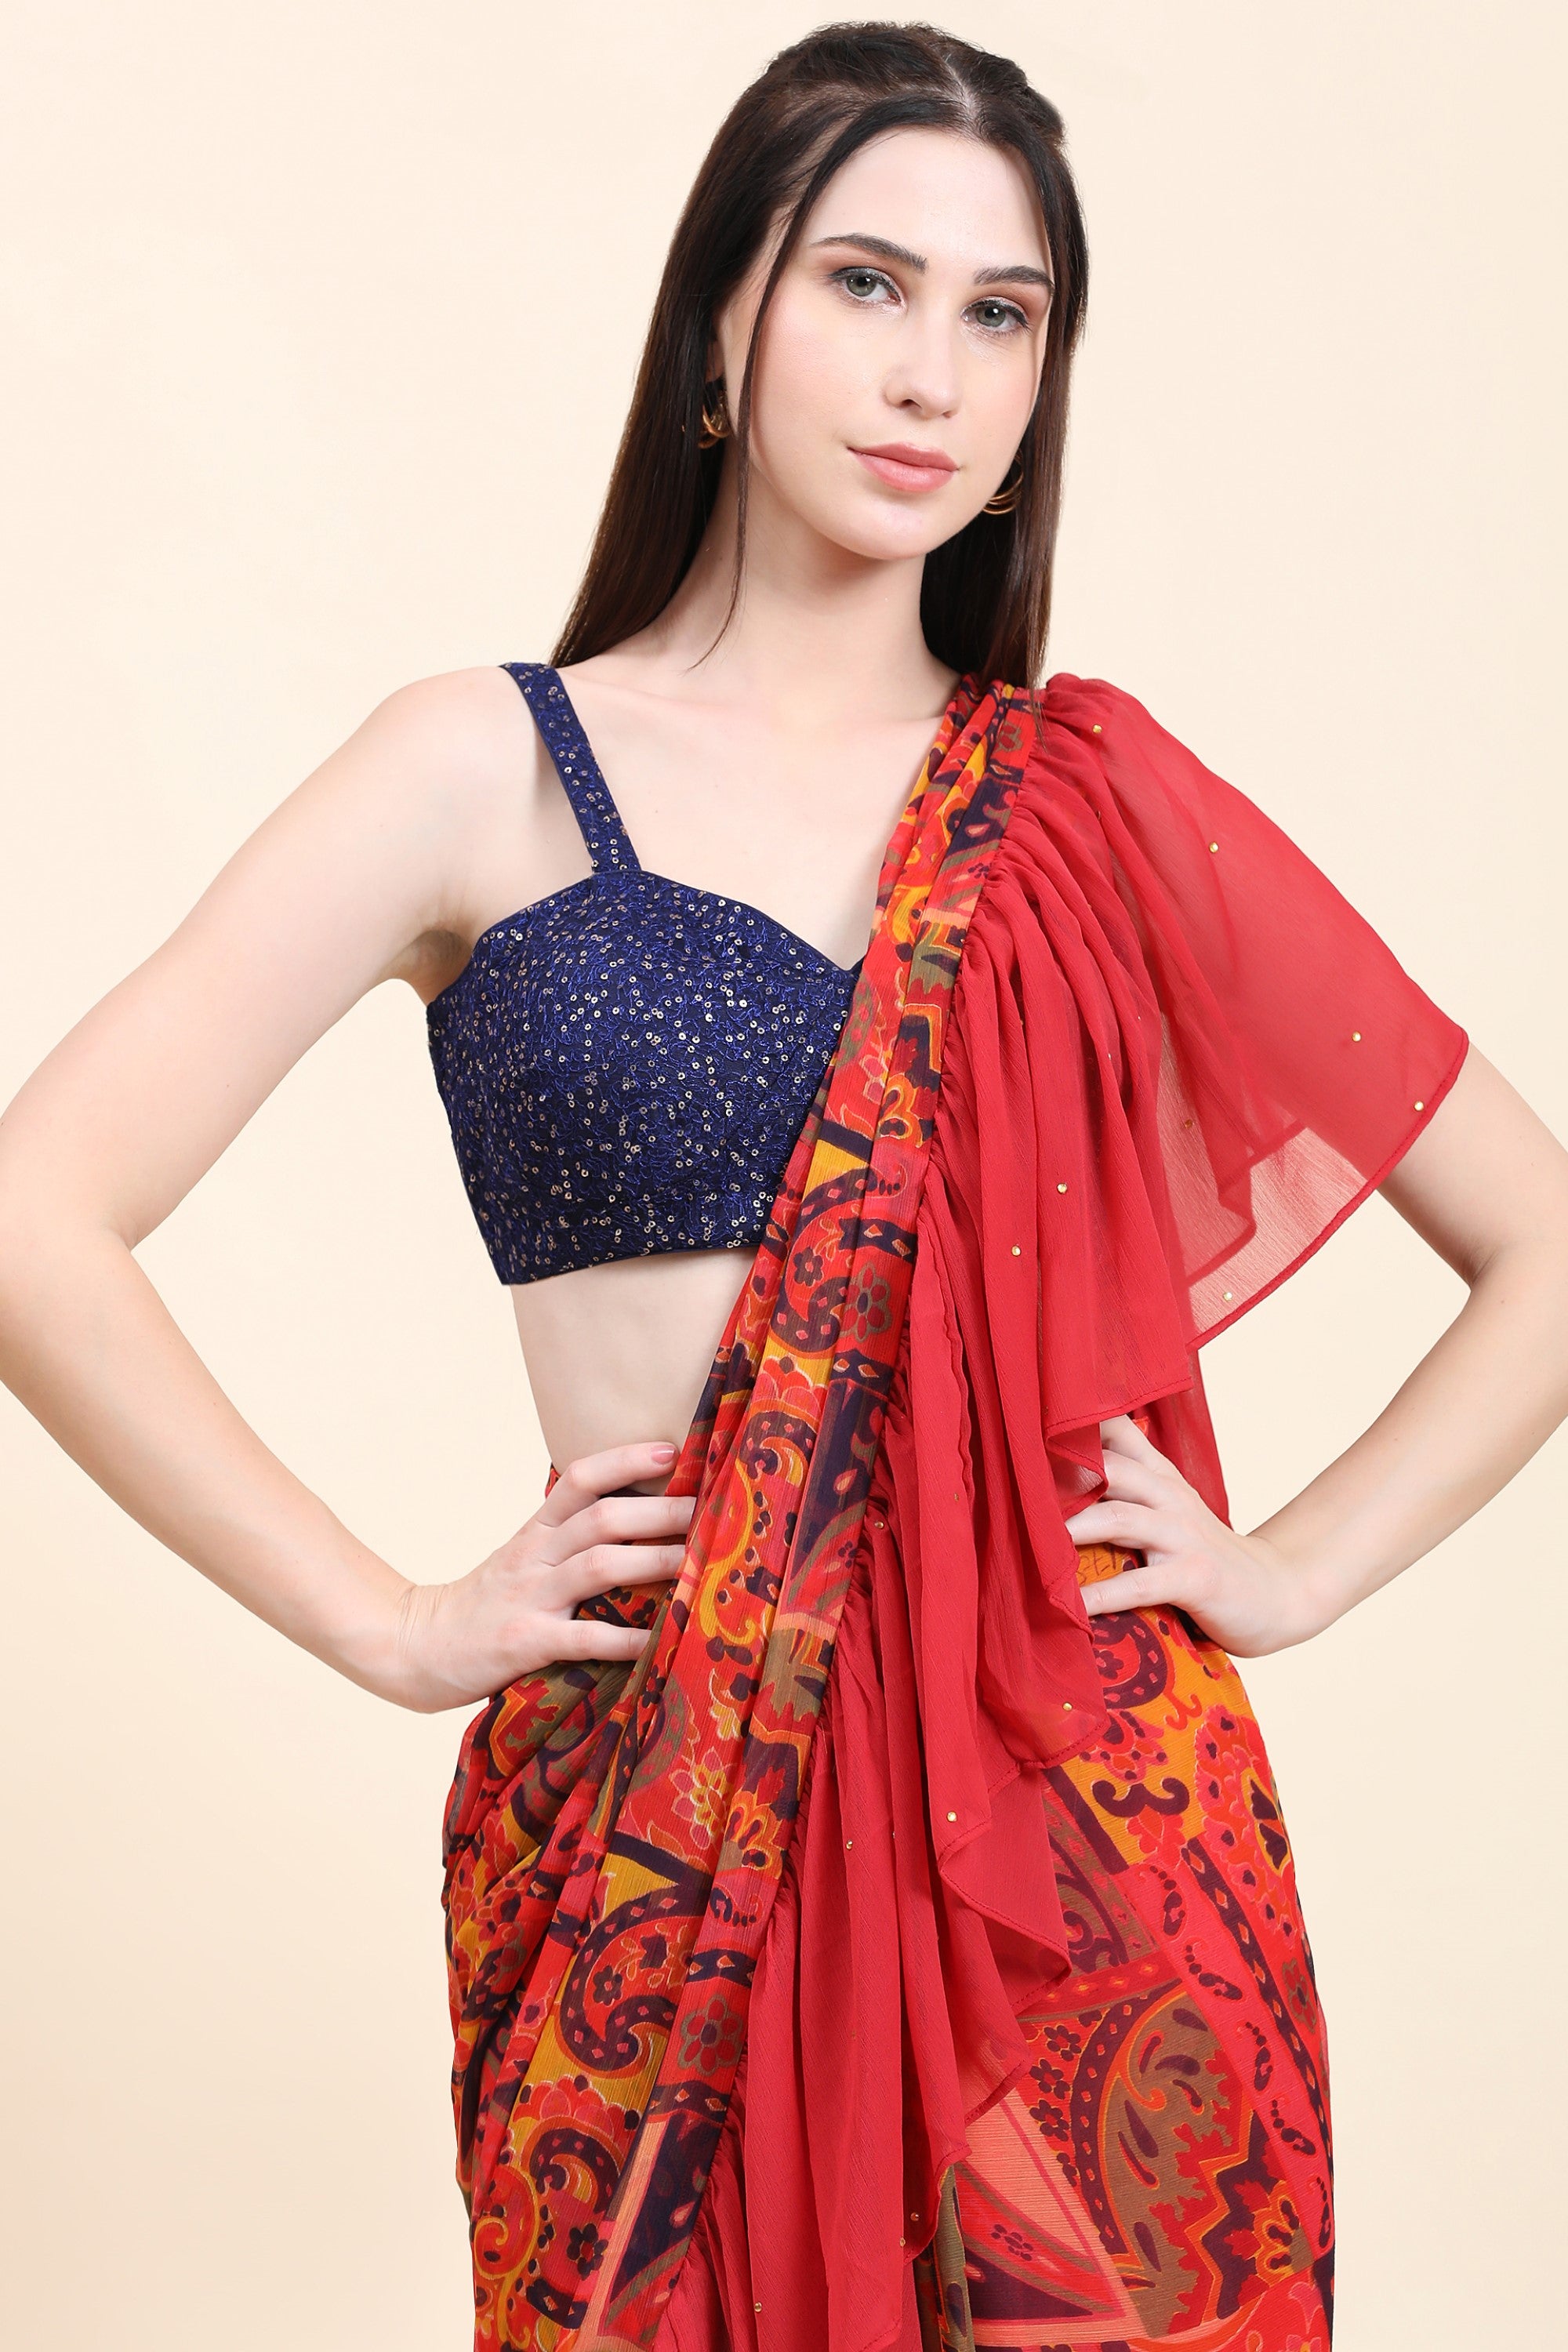 Women's Printed Chiffon Red base Ruffle Saree, Sequins Blouse set - MIRACOLOS by Ruchi